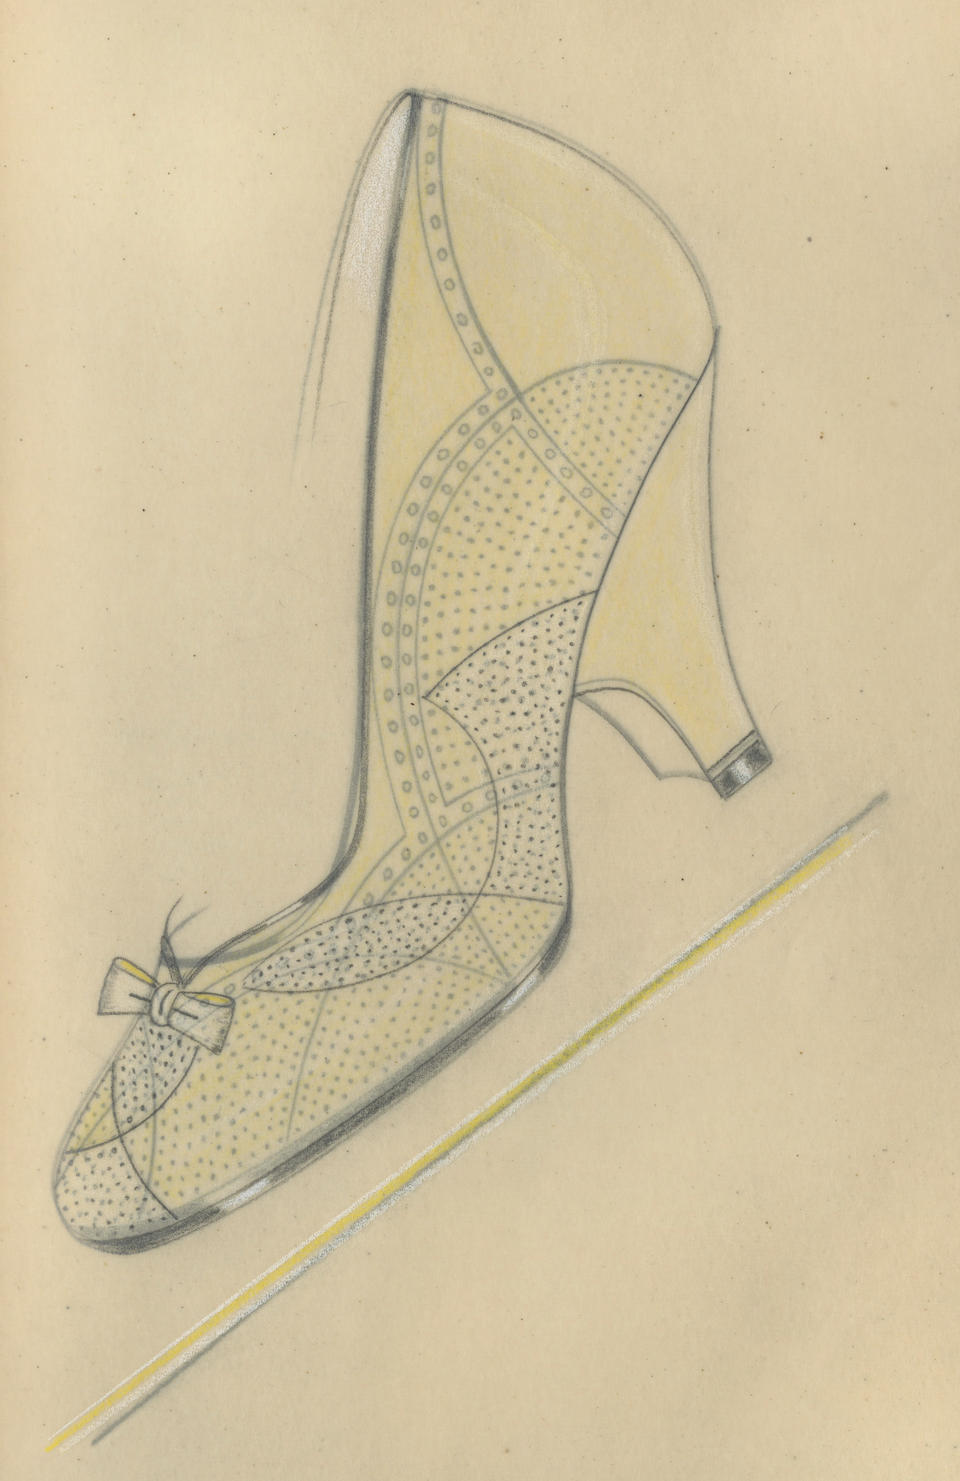 SHOE AND JEWELLERY DESIGNS Album containing approximately 165 designs for ladies' court shoes and high heels with myriad varying decorations, [probably Germany, 1950s] (2)